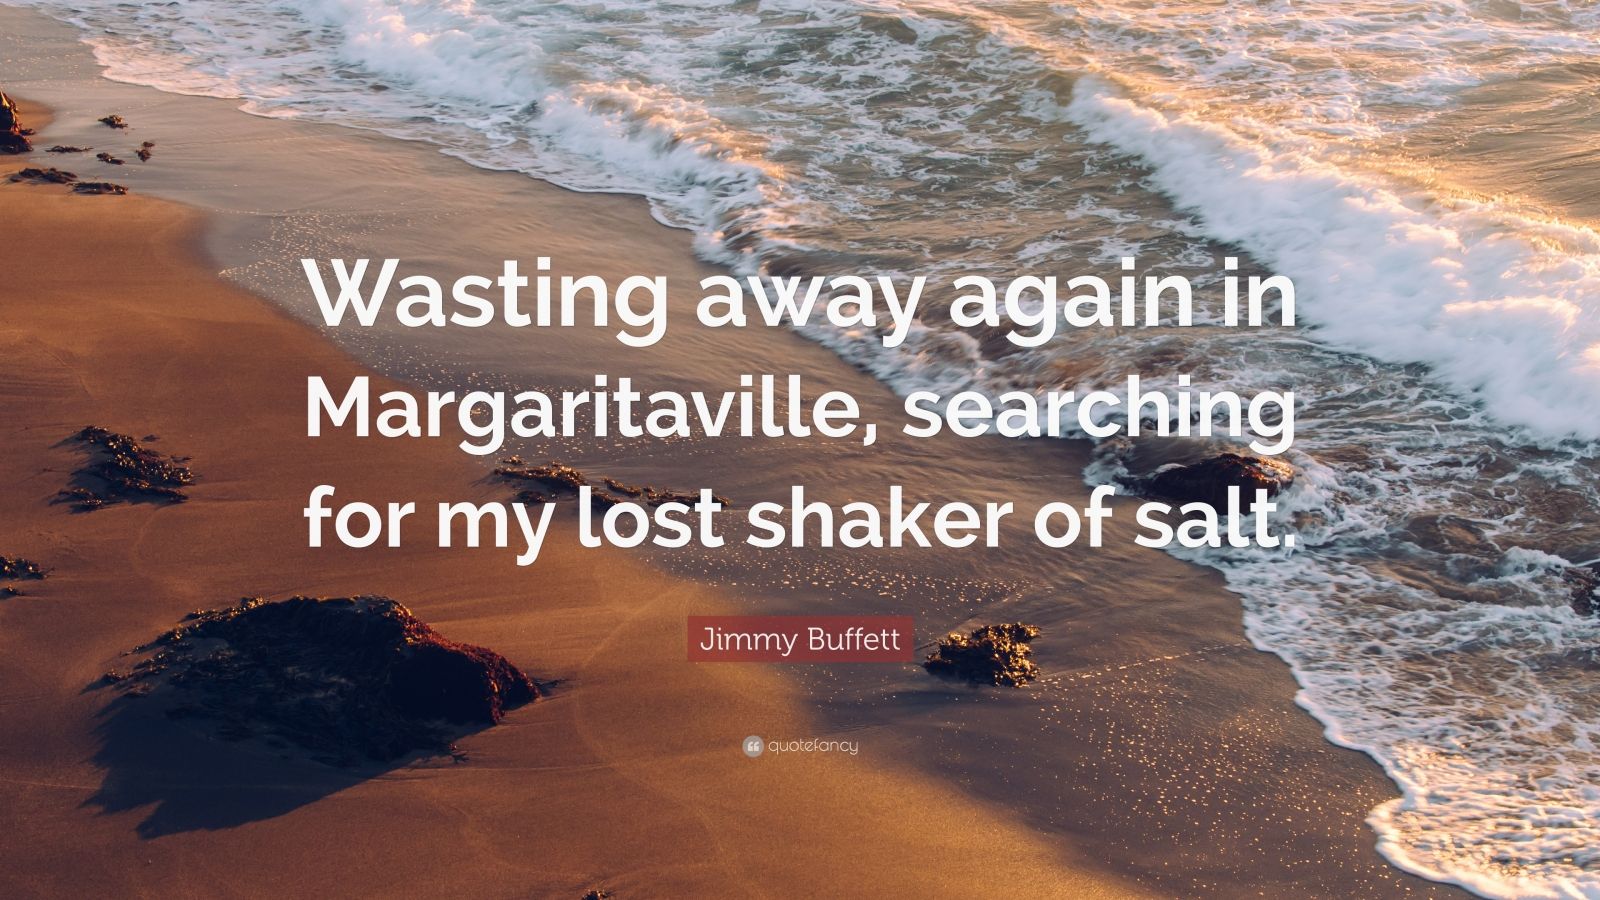 Jimmy Buffett Quote: “Wasting away again in Margaritaville, searching